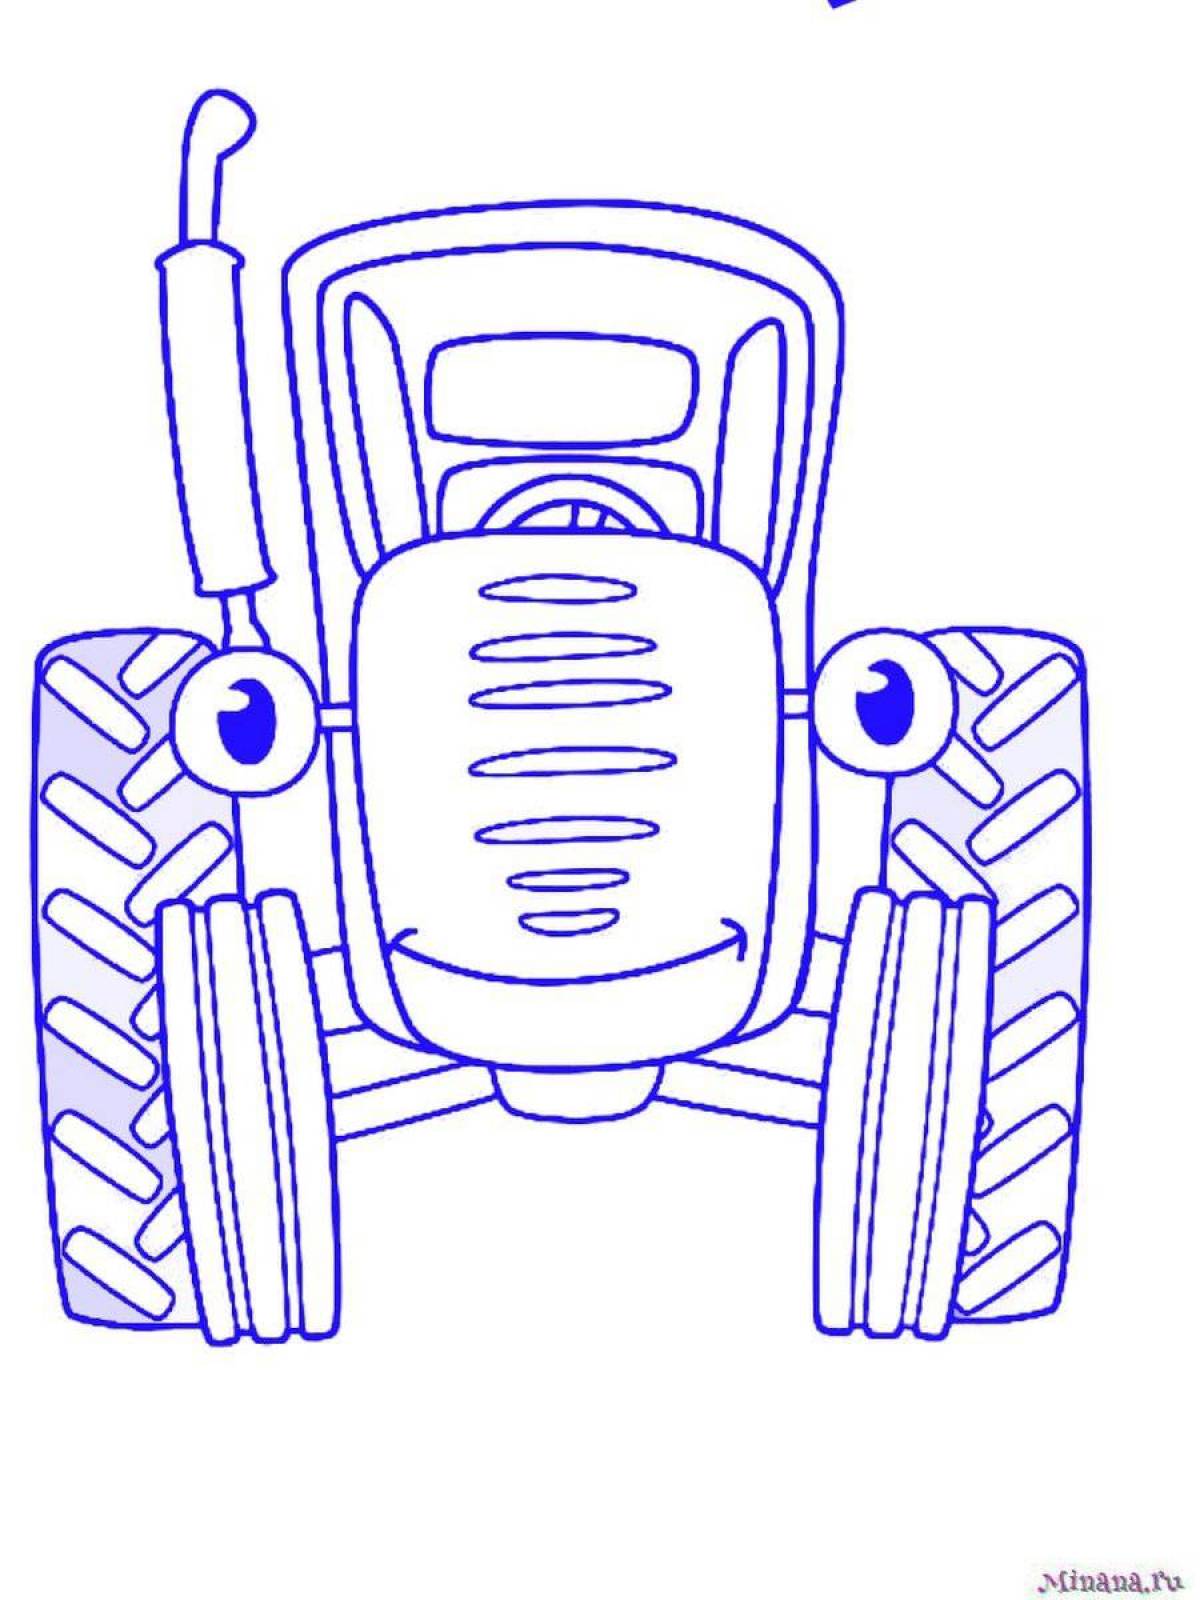 Cute blue tractor coloring book for kids